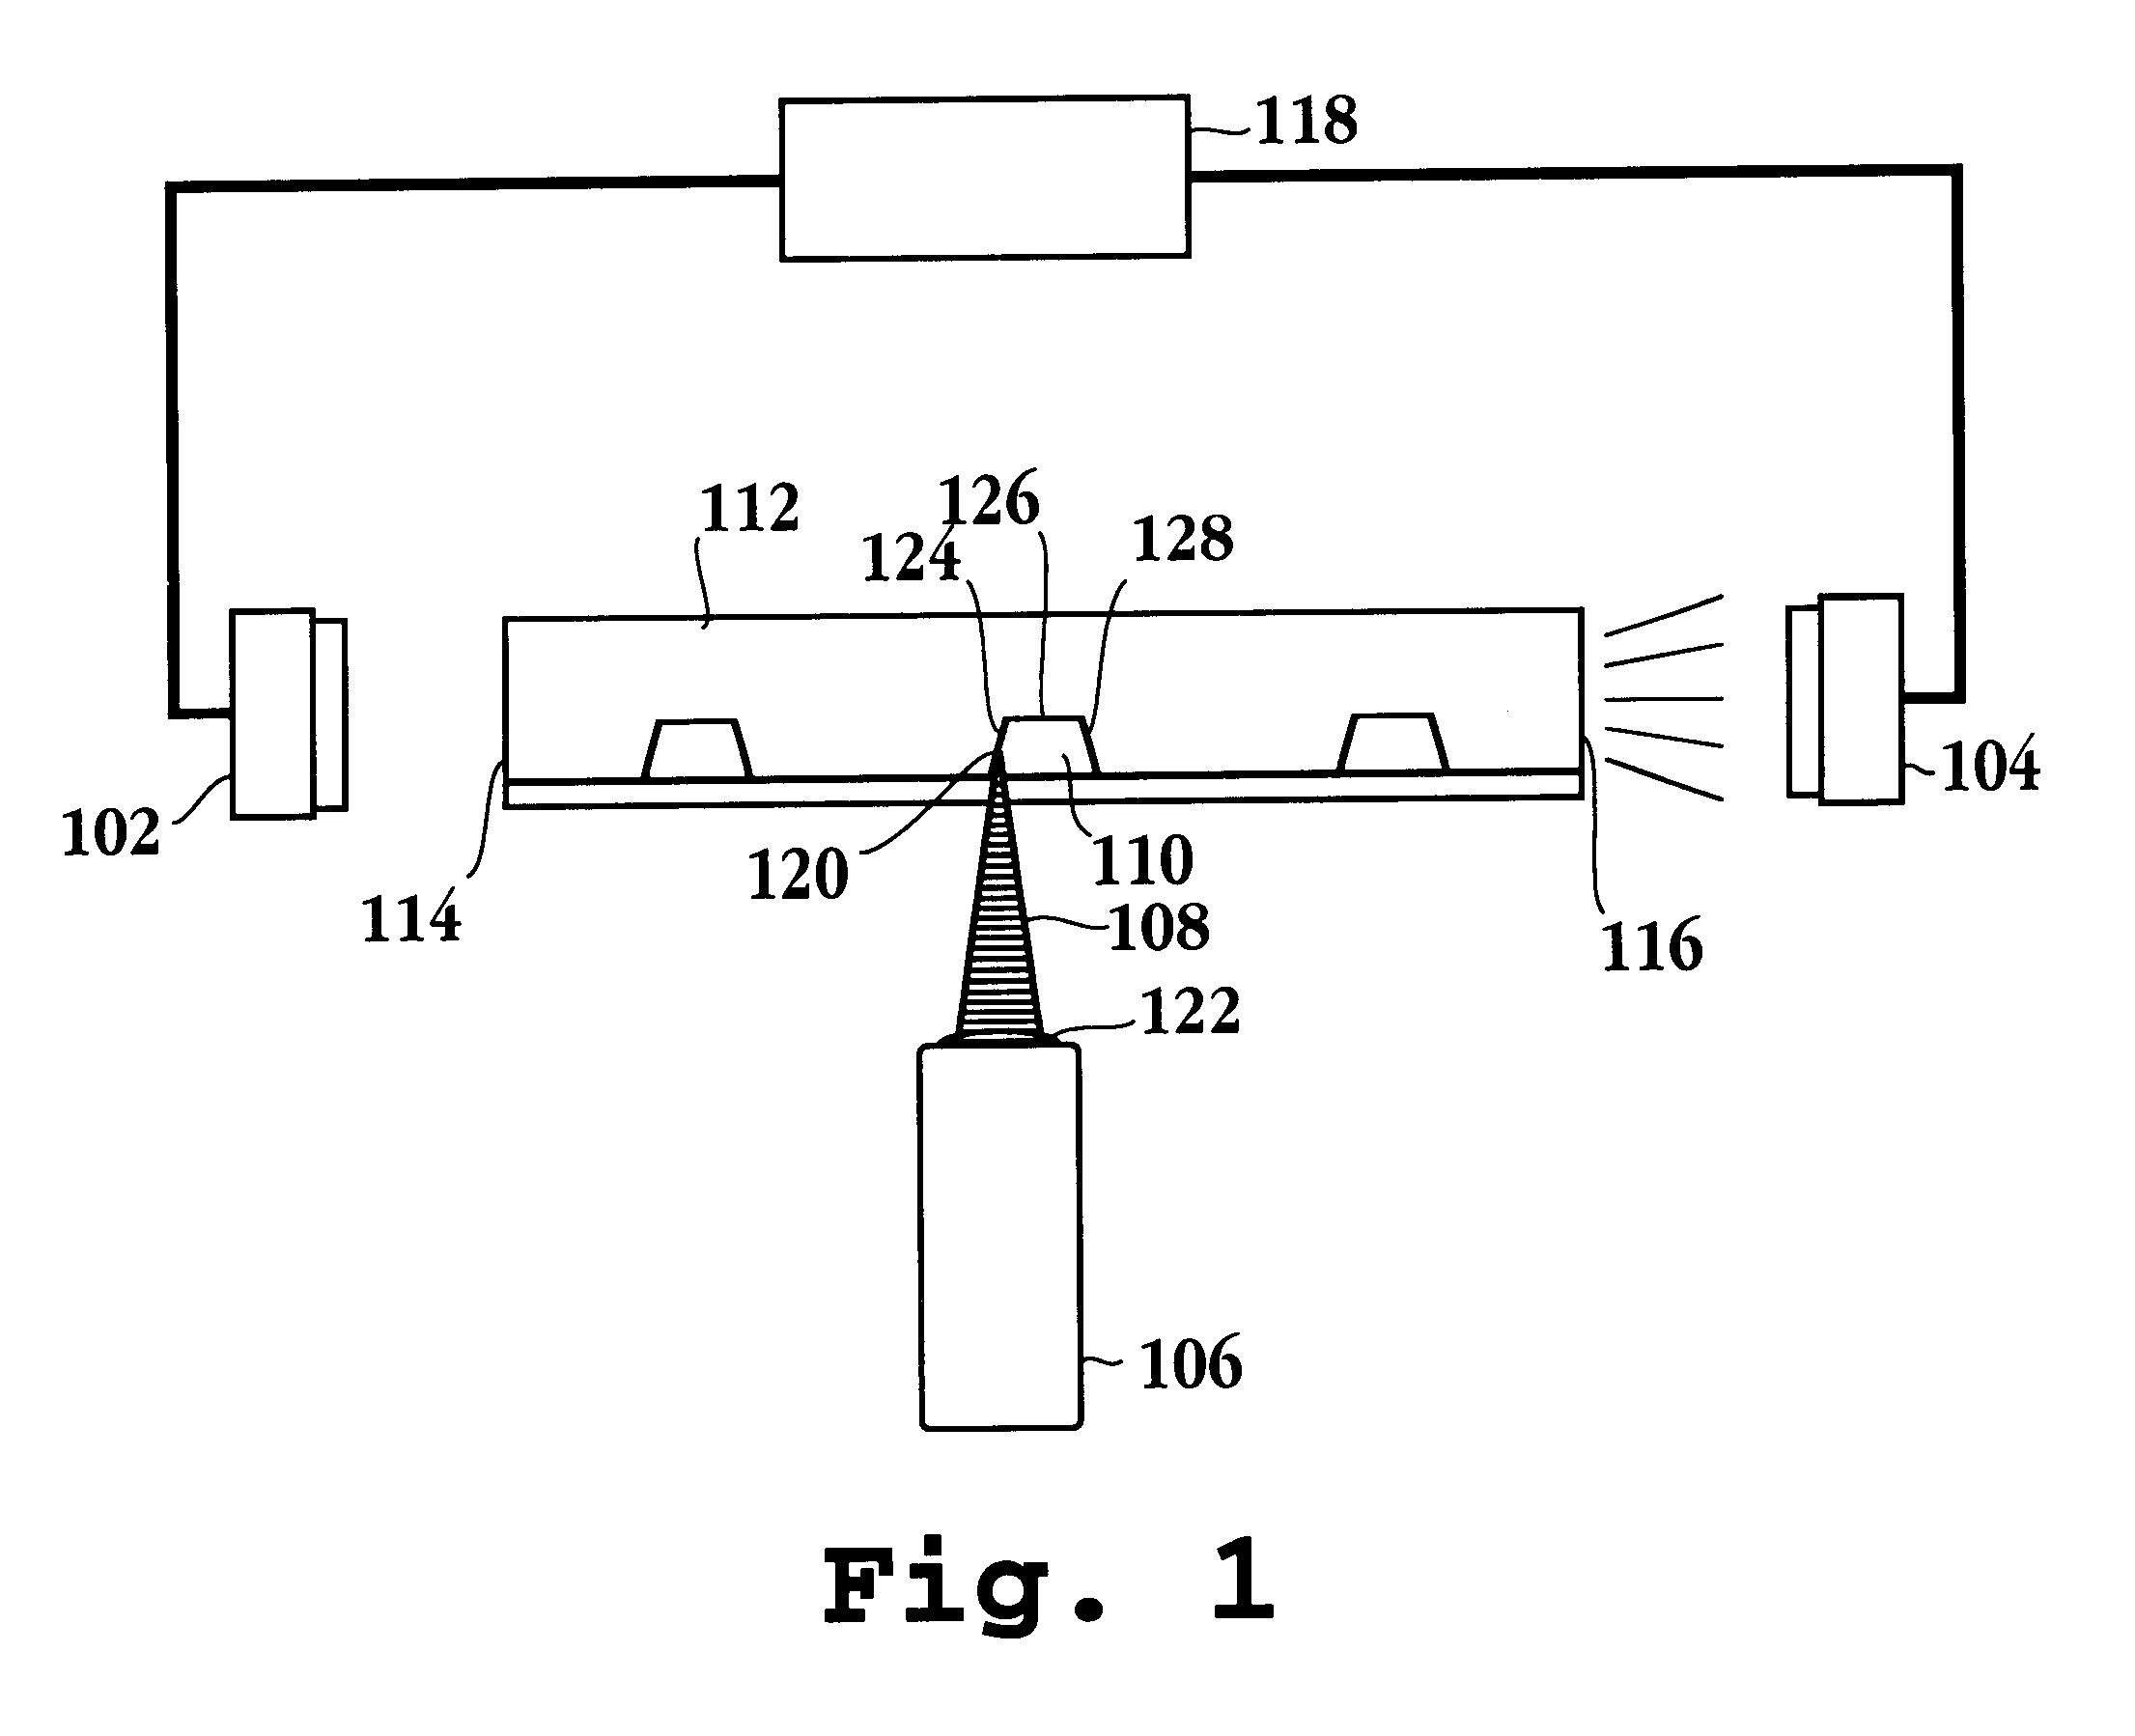 Optical alignment in capillary detection using capillary wall scatter